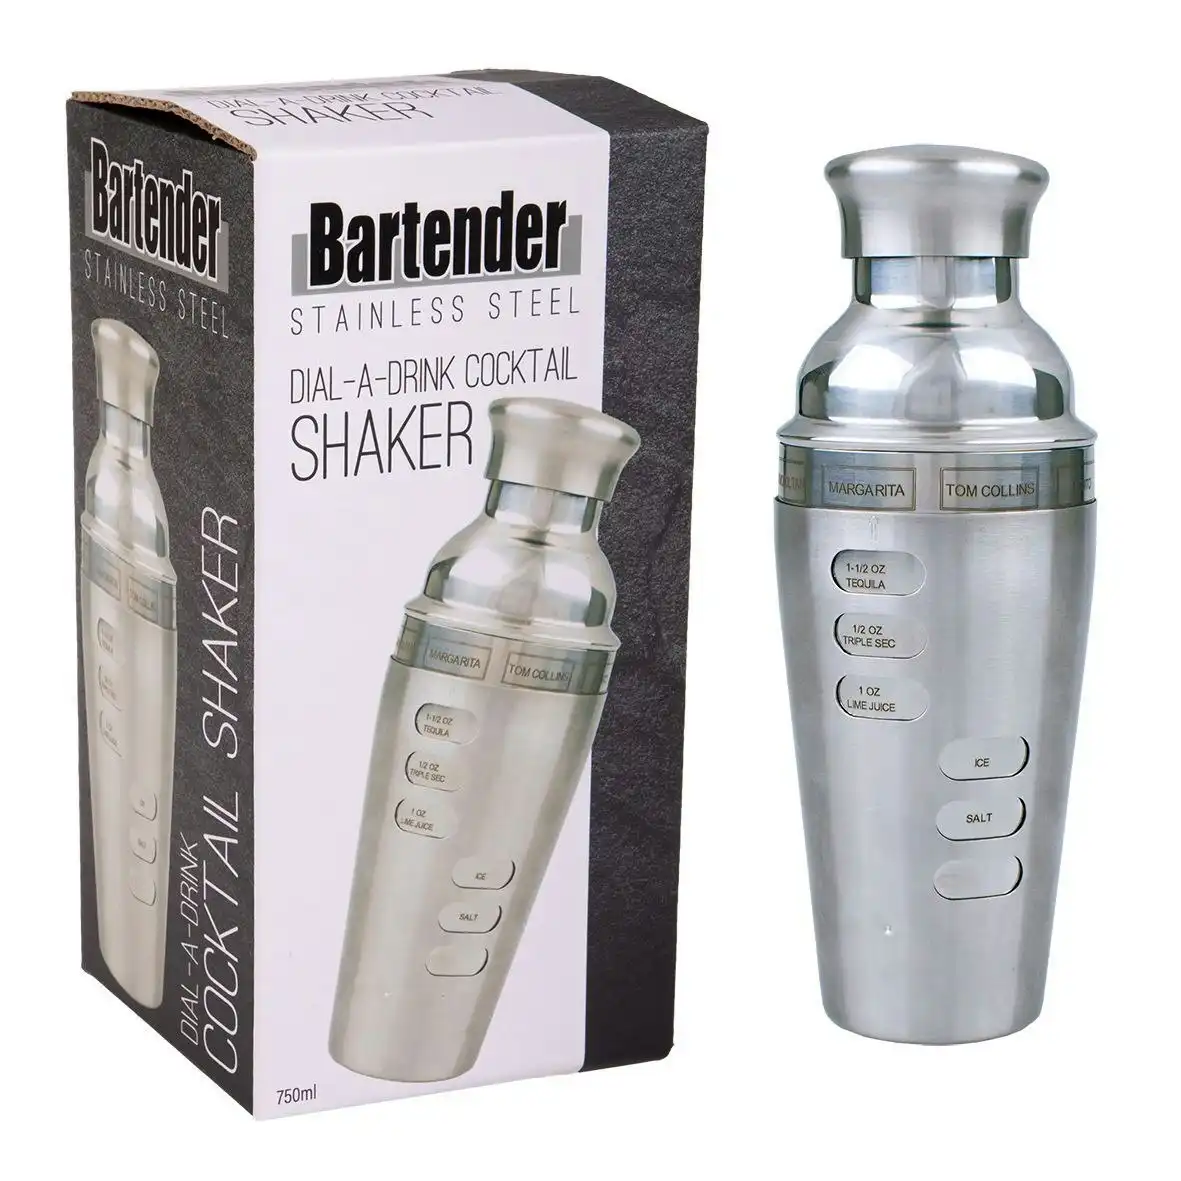 DIAL A DRINK COCKTAIL SHAKER 750ml